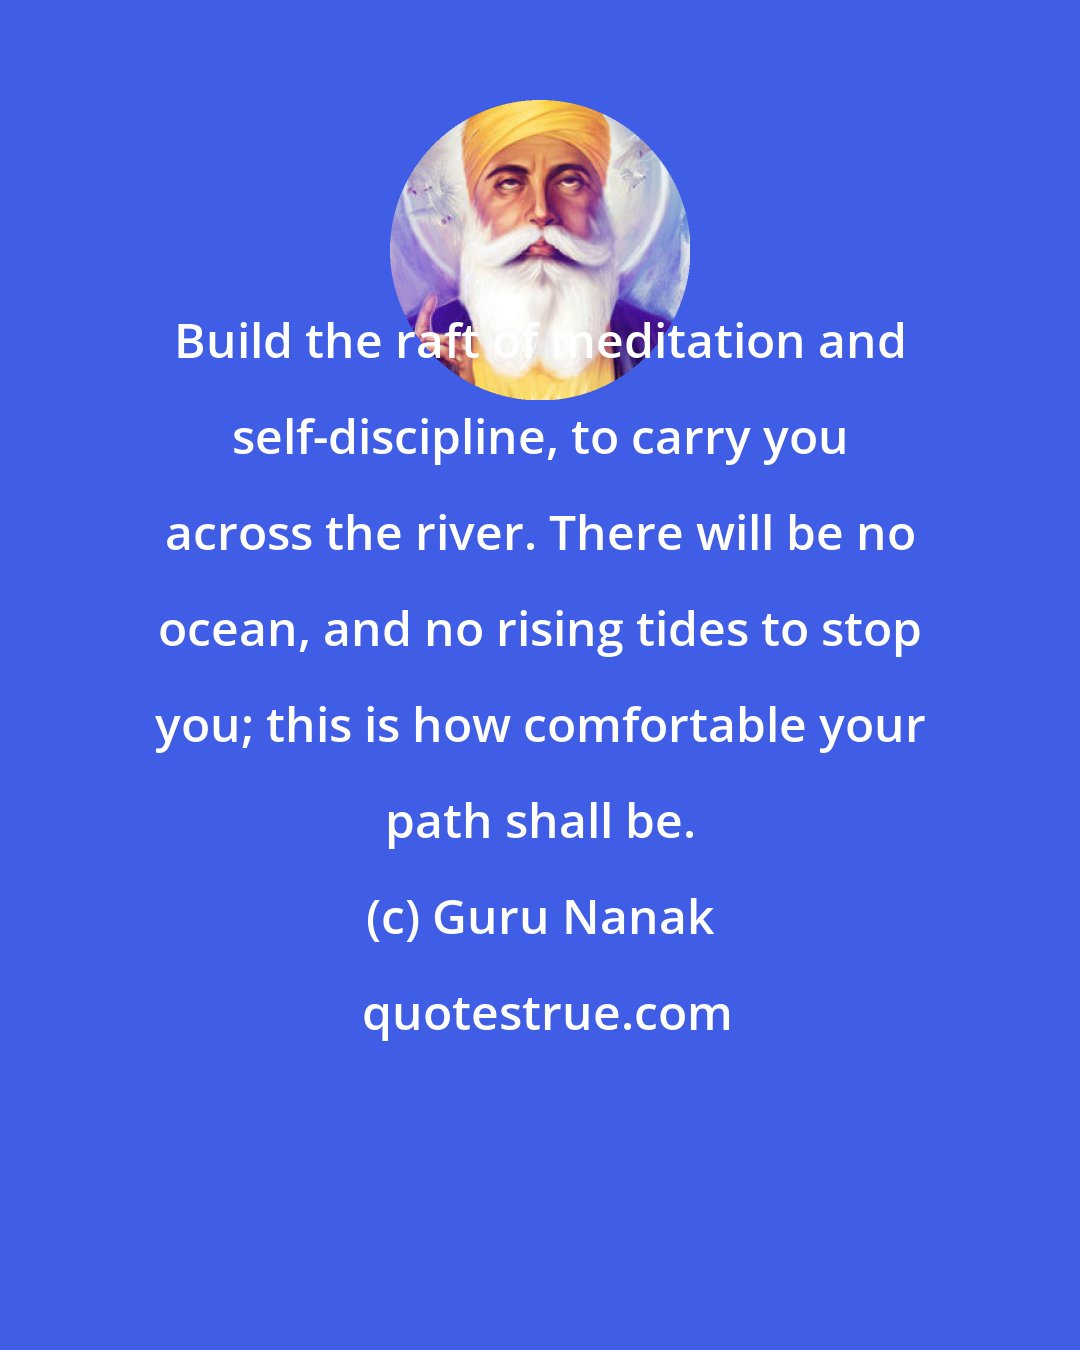 Guru Nanak: Build the raft of meditation and self-discipline, to carry you across the river. There will be no ocean, and no rising tides to stop you; this is how comfortable your path shall be.